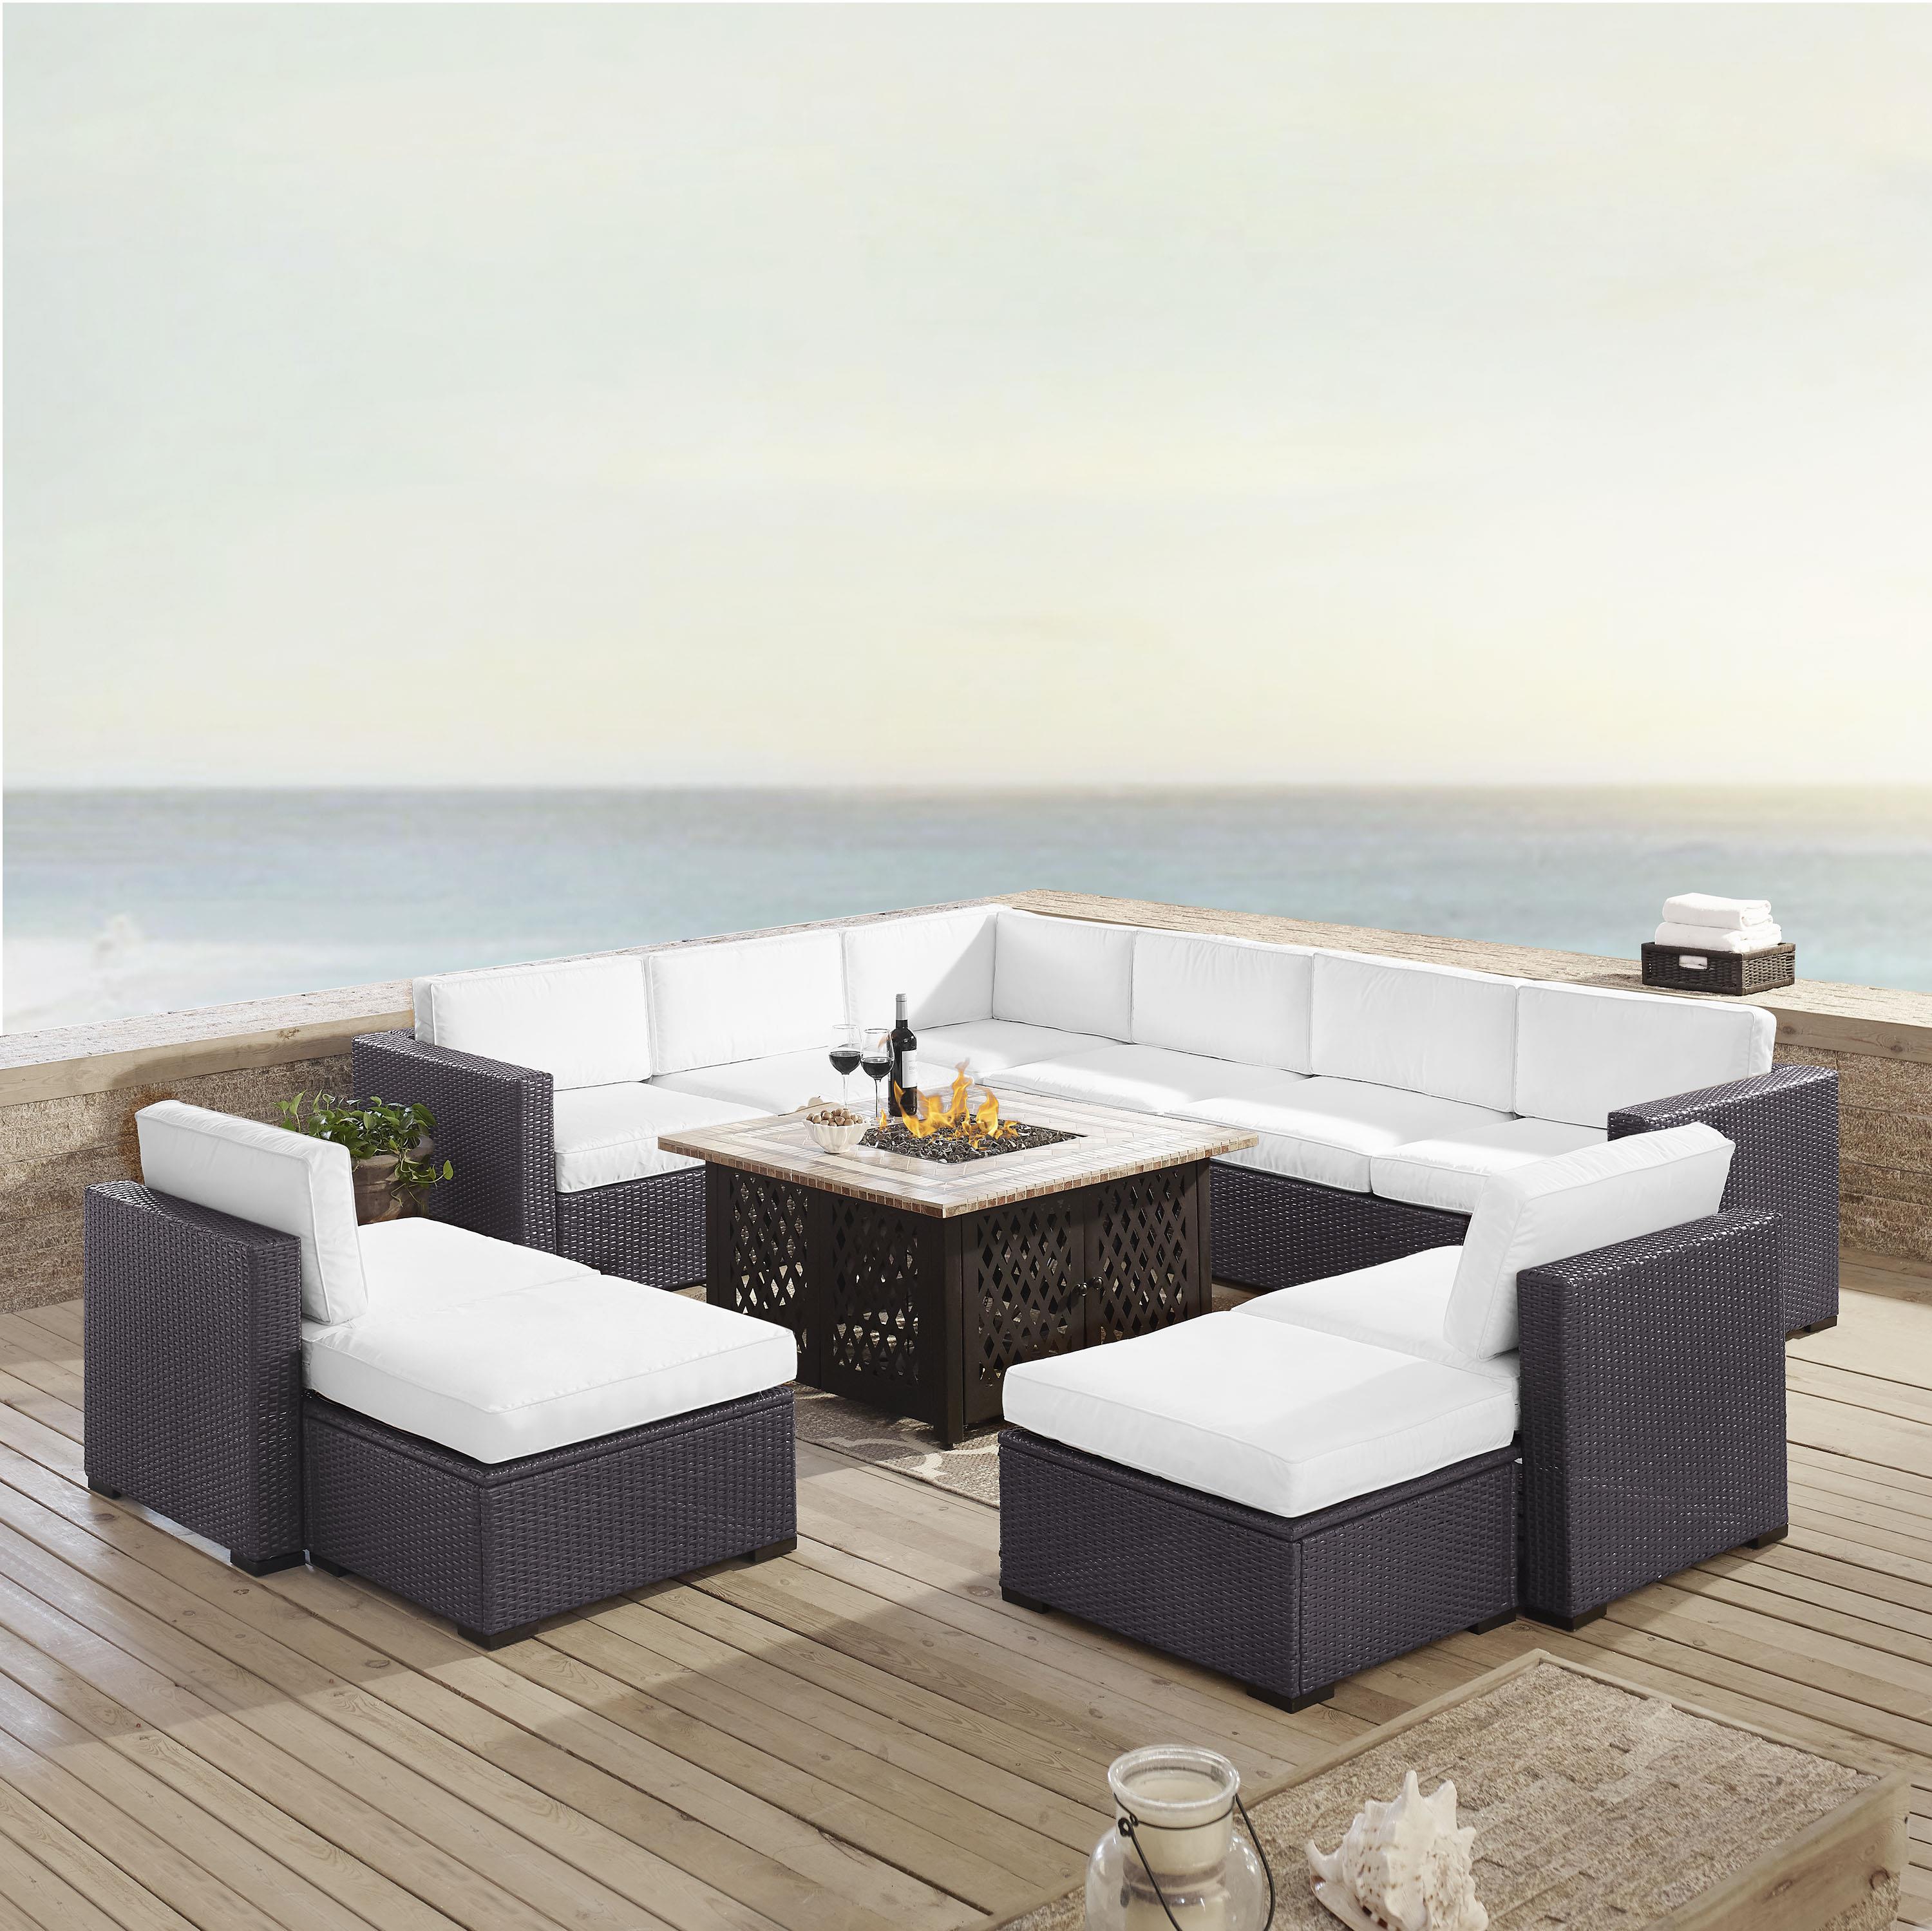 Crosley Furniture Biscayne 8 Piece Fabric Patio Fire Pit Sectional Set in White - image 2 of 4